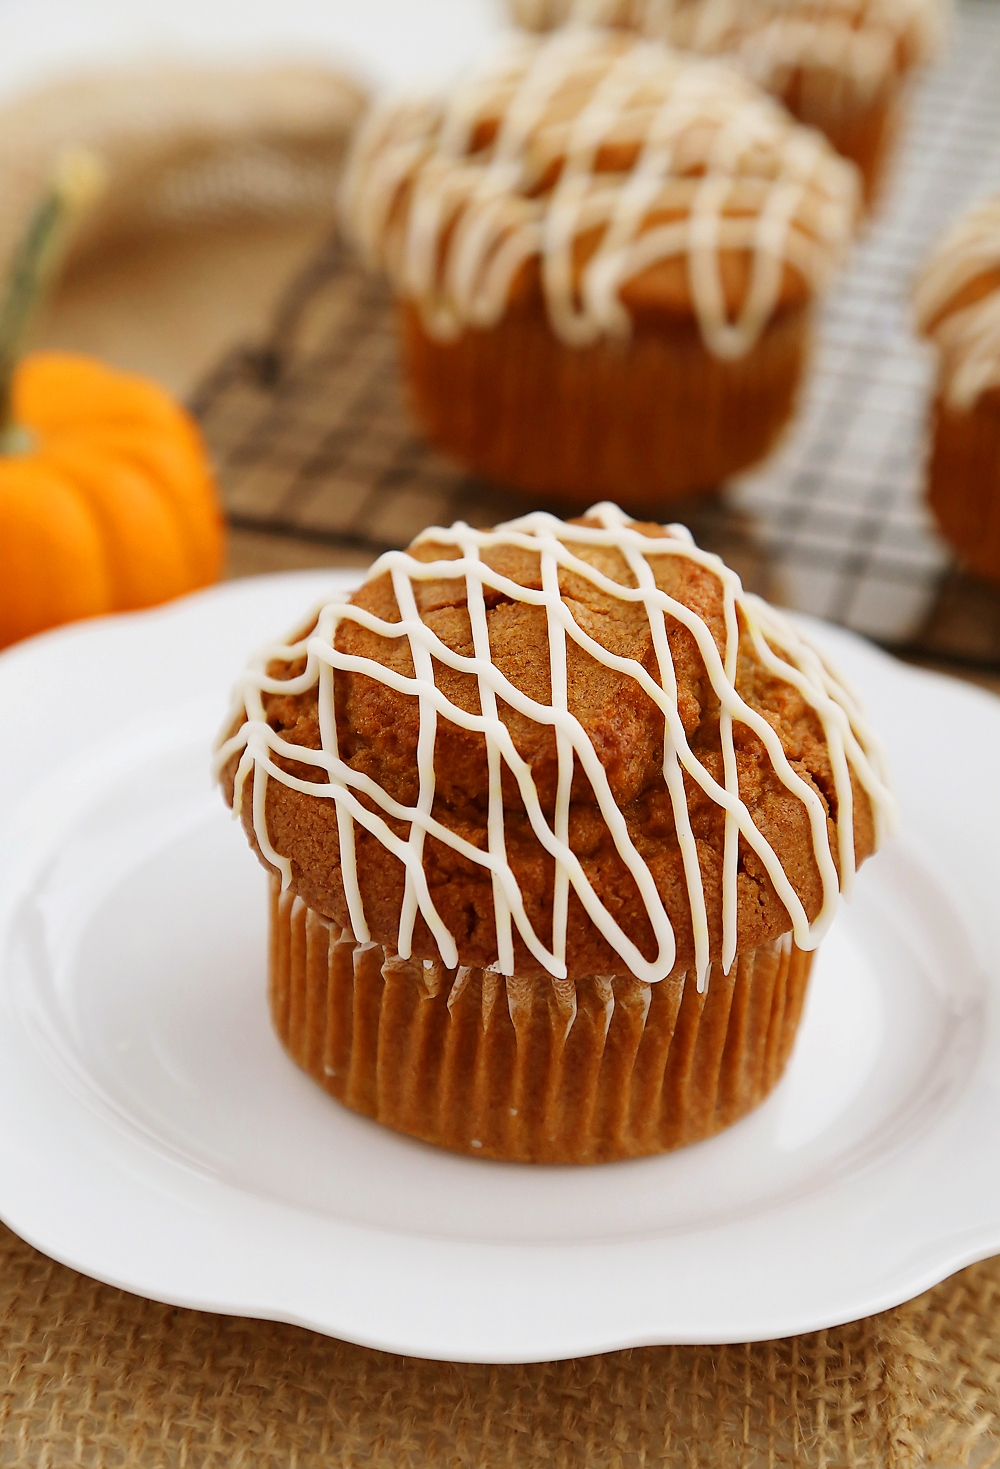 Vanilla Glazed Pumpkin Gingerbread Muffins - Super soft, richly spiced pumpkin muffins made easily in one bowl! So simple, delicious and perfect for homemade gifts. Thecomfortofcooking.com